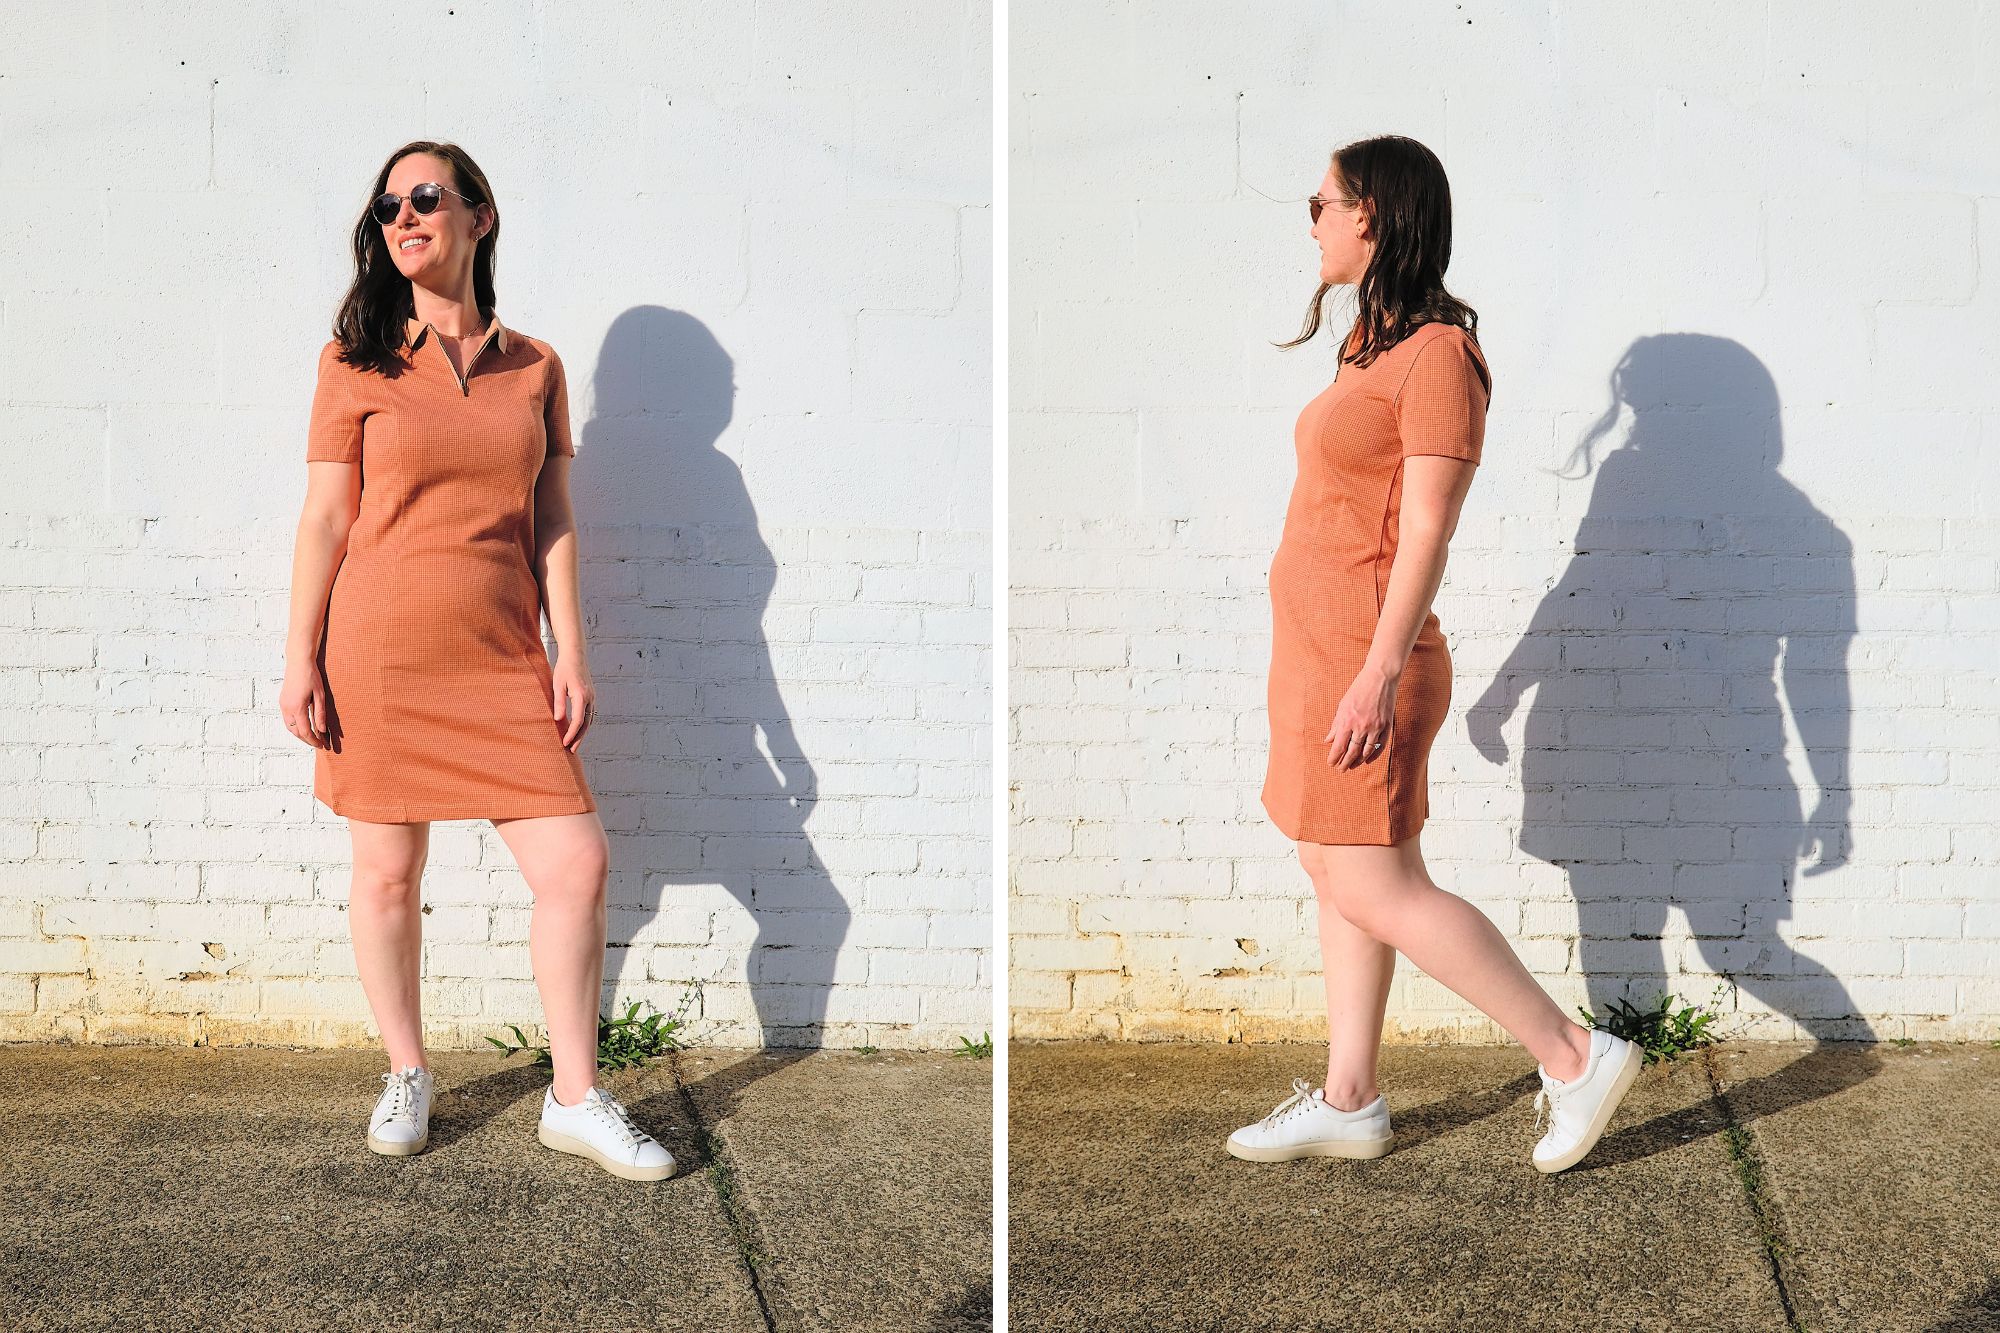 Alyssa wears the Jules Tennis Dress from ABLE